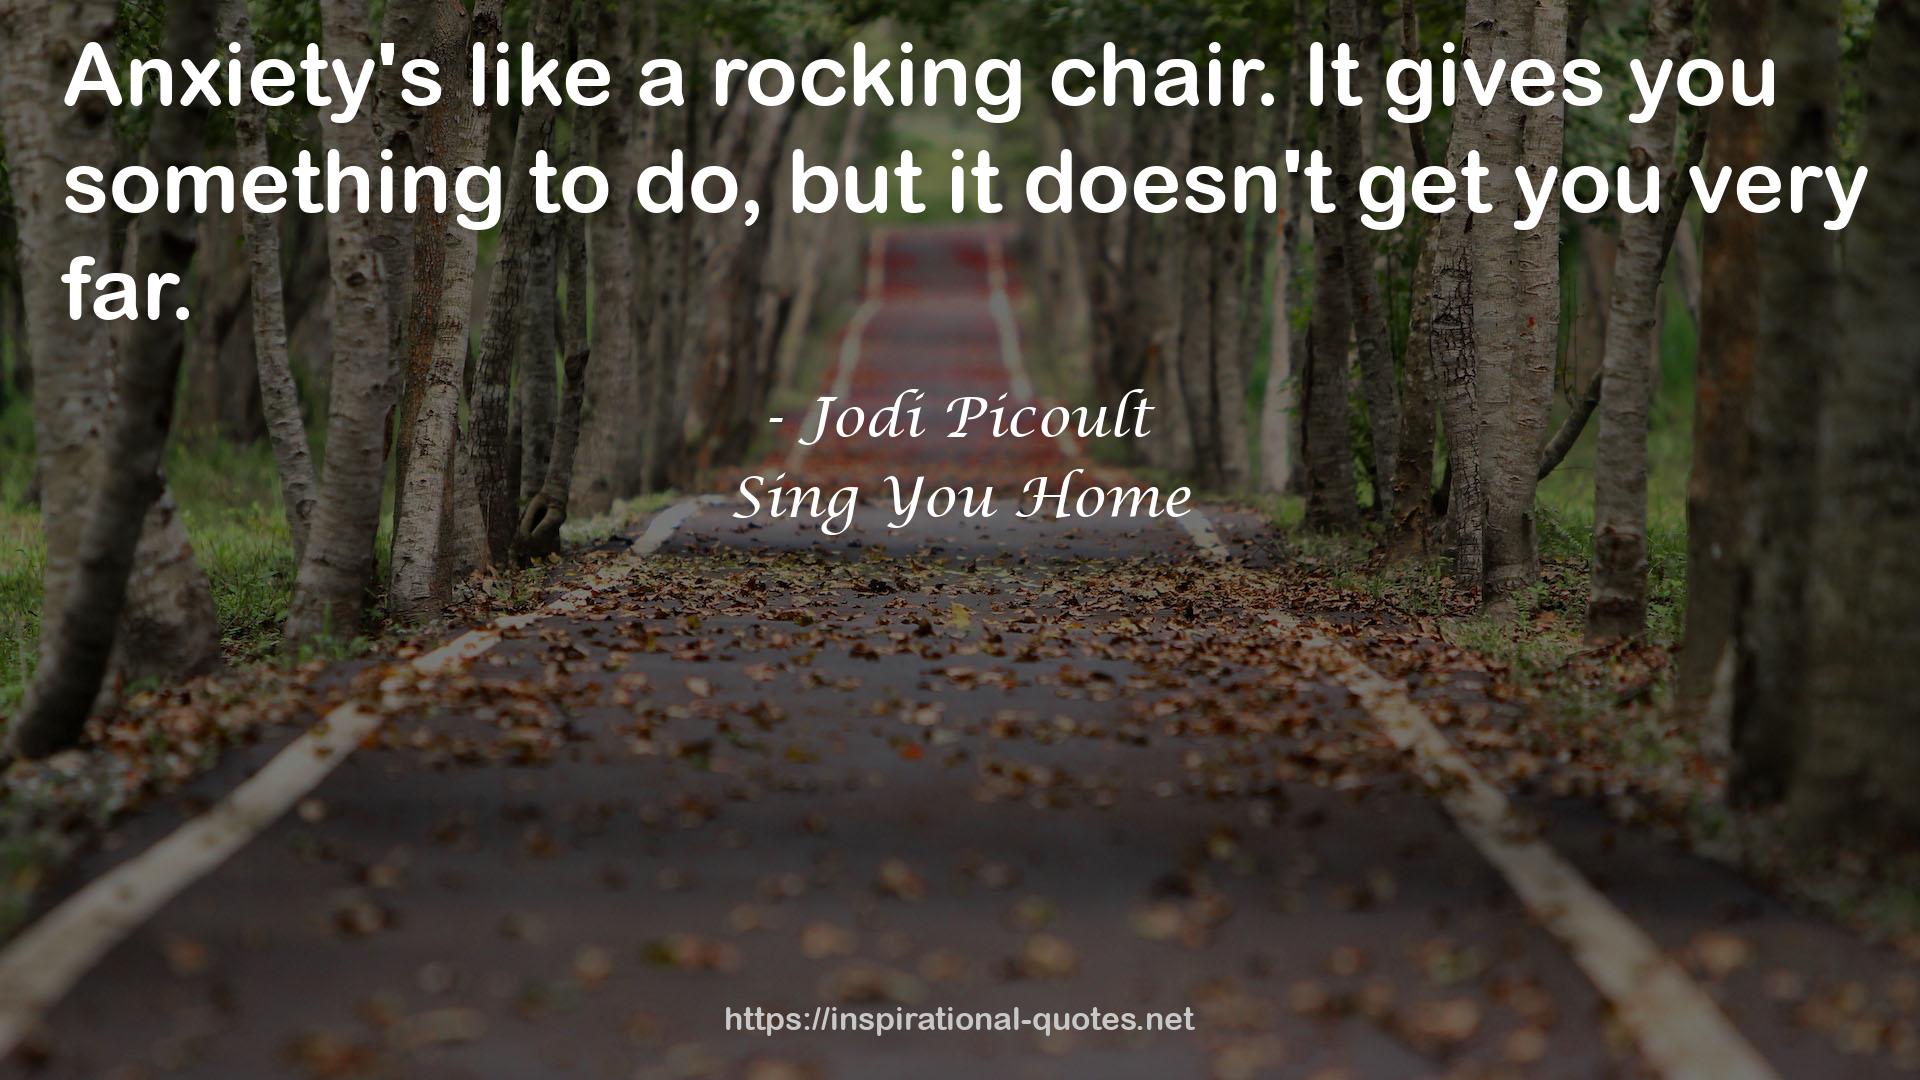 Sing You Home QUOTES